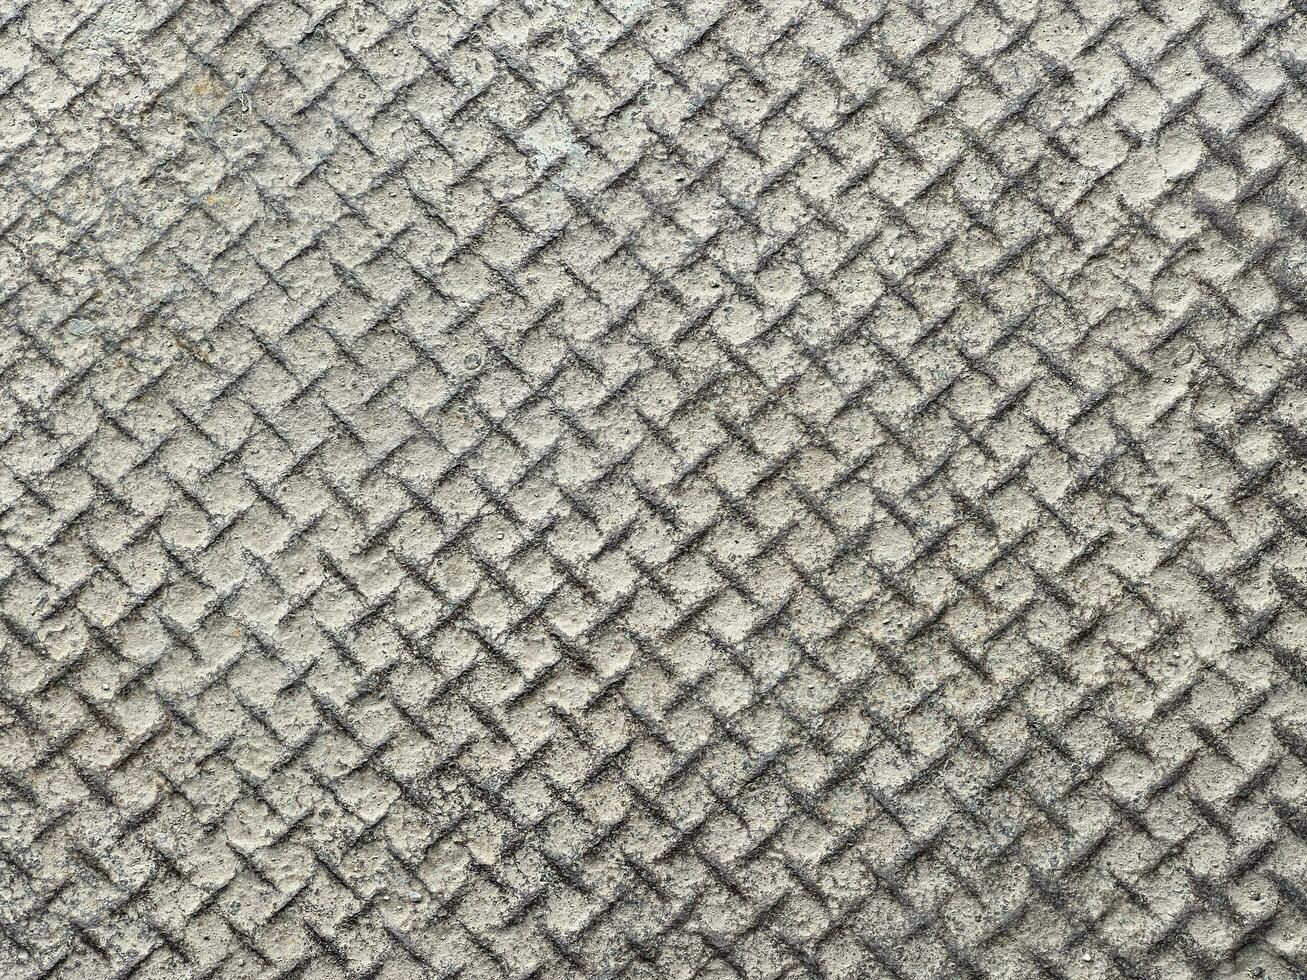 Weathered stainless steel tread diamond plate with dust industrial flooring photo